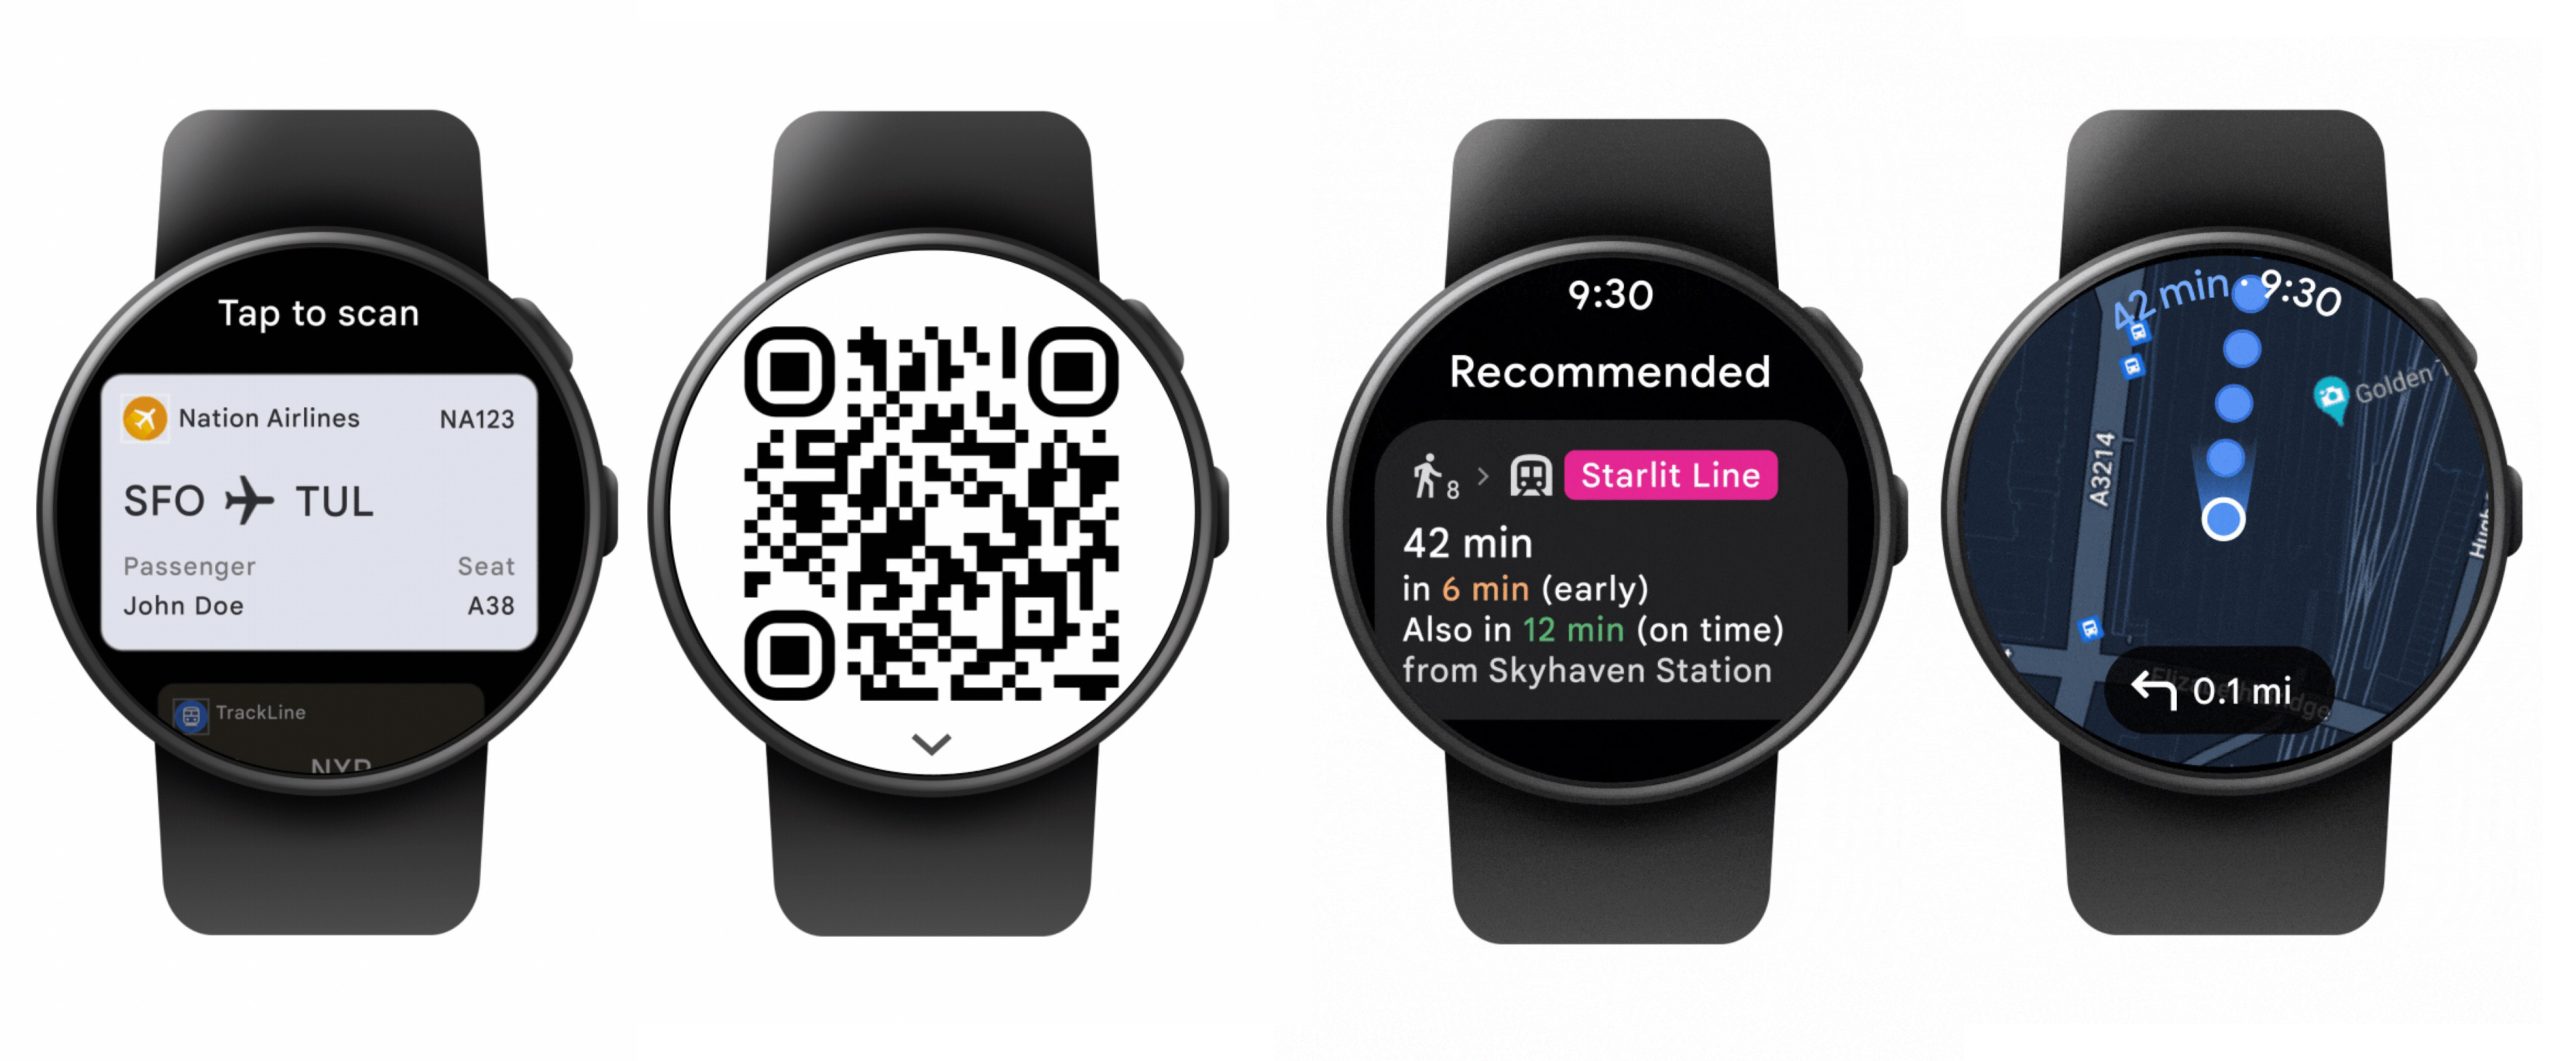 Your WearOS smartwatch just got very useful Google Maps and Wallet